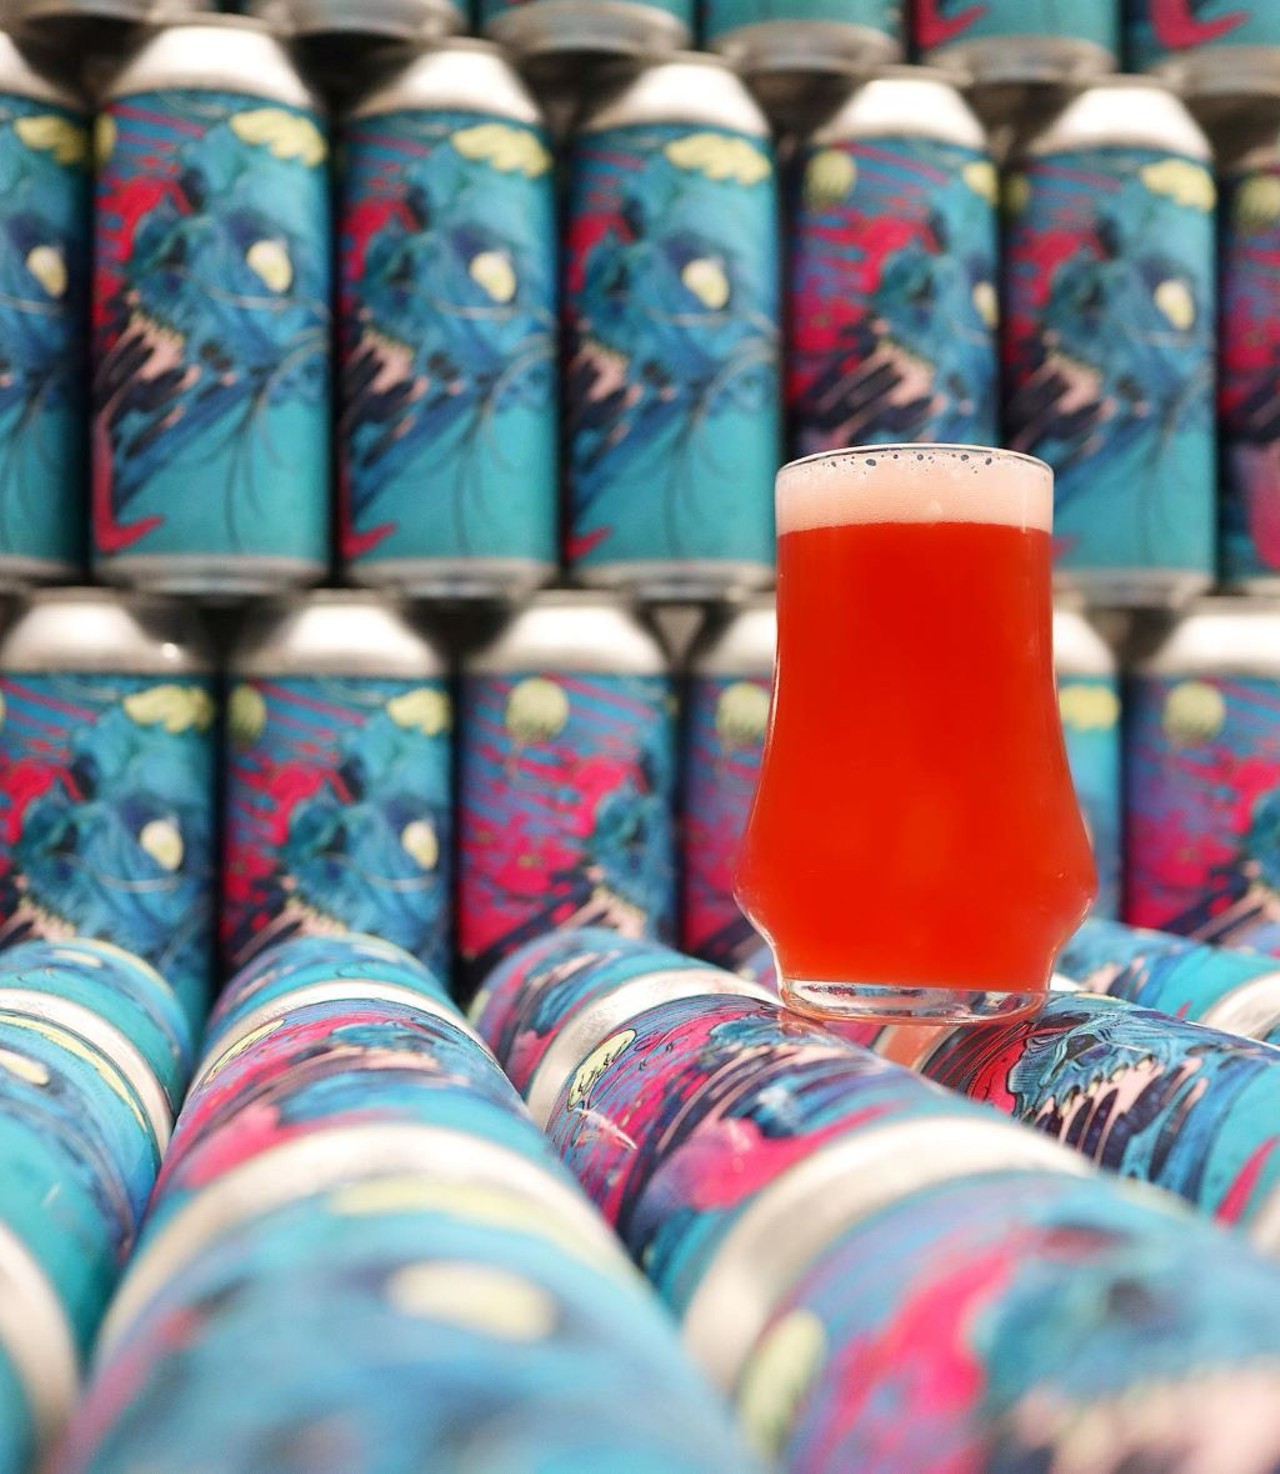 Tactical Brewing Co. 
4882 New Broad St.
Tactical Brewing Co. just re-released the Zombie Curb Stomp, a tropical fruit punch sour. The beer has been released in cans for the first time; grab a 4-pack while you can.  
Photo via Tactical Brewing Company/Facebook